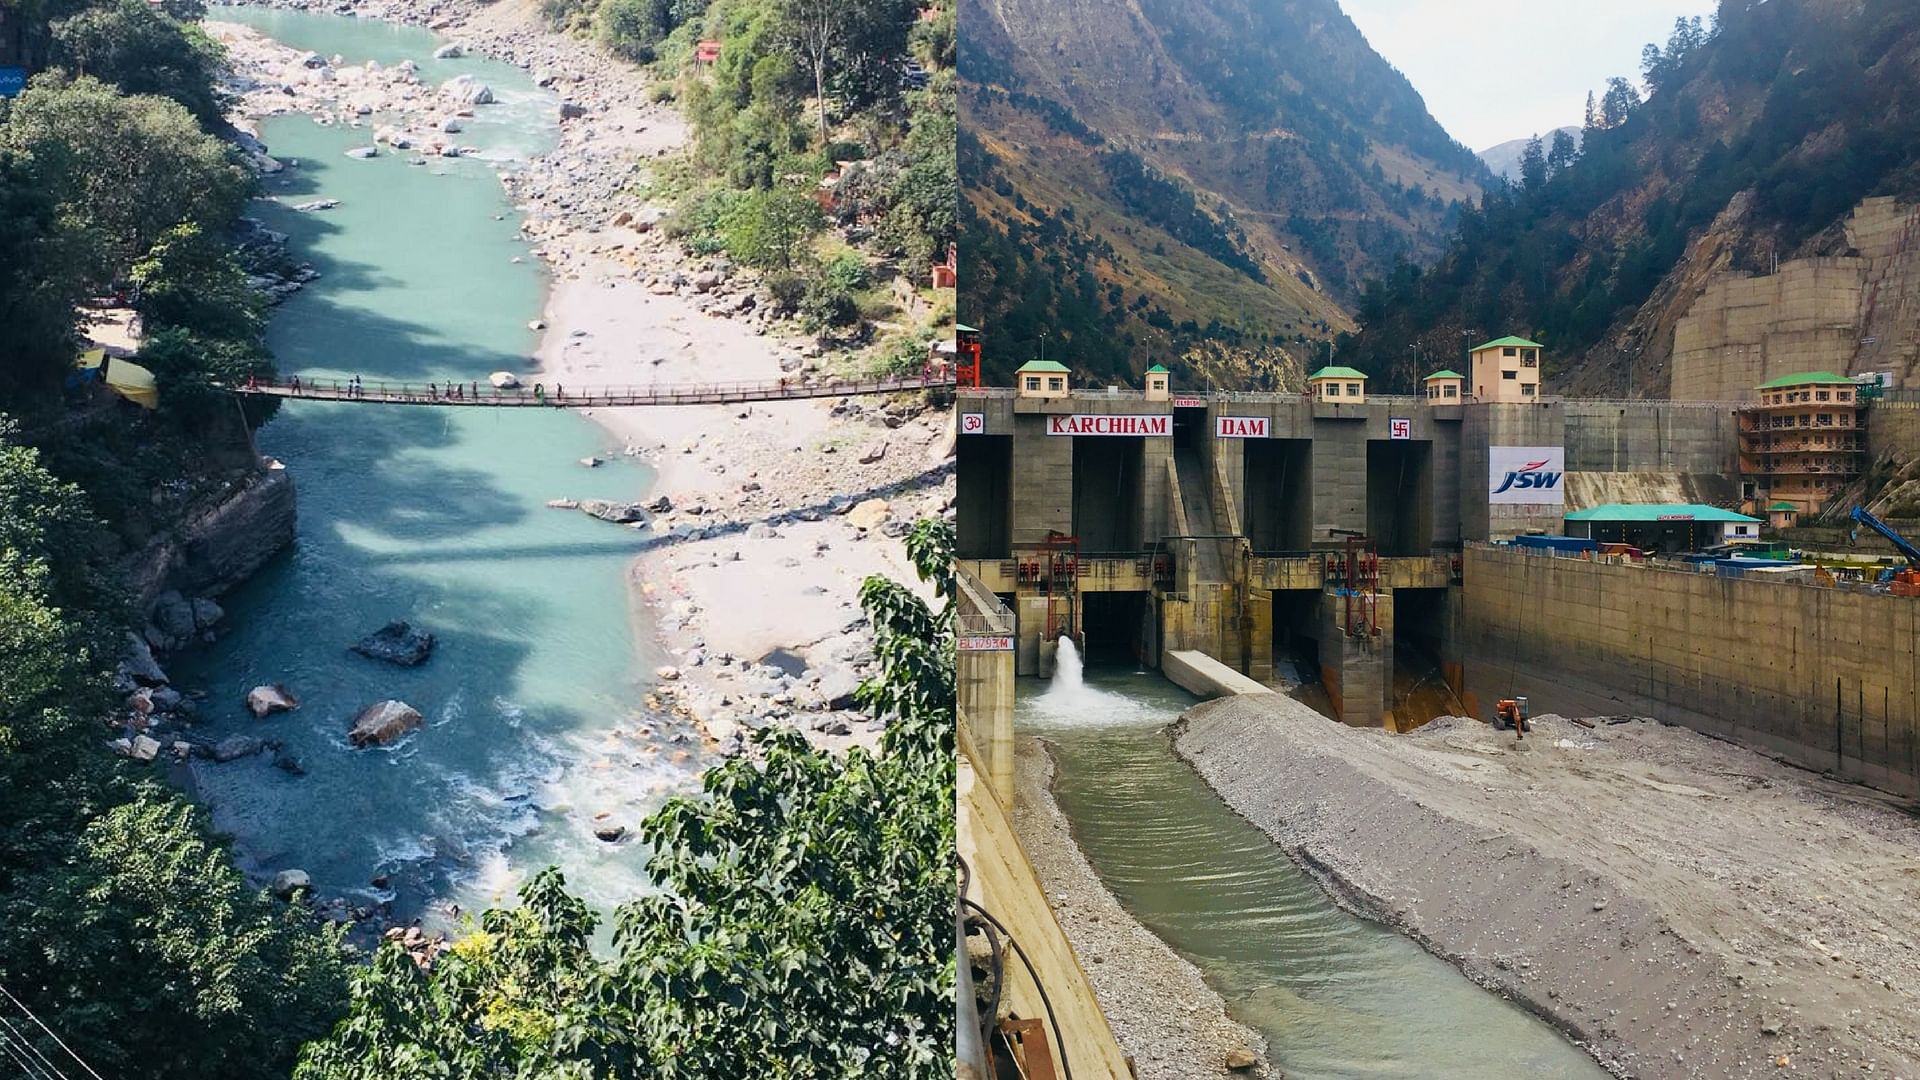 The Sutlej river is home to at least 7 hydropower projects in Kinnaur district in Himachal Pradesh.